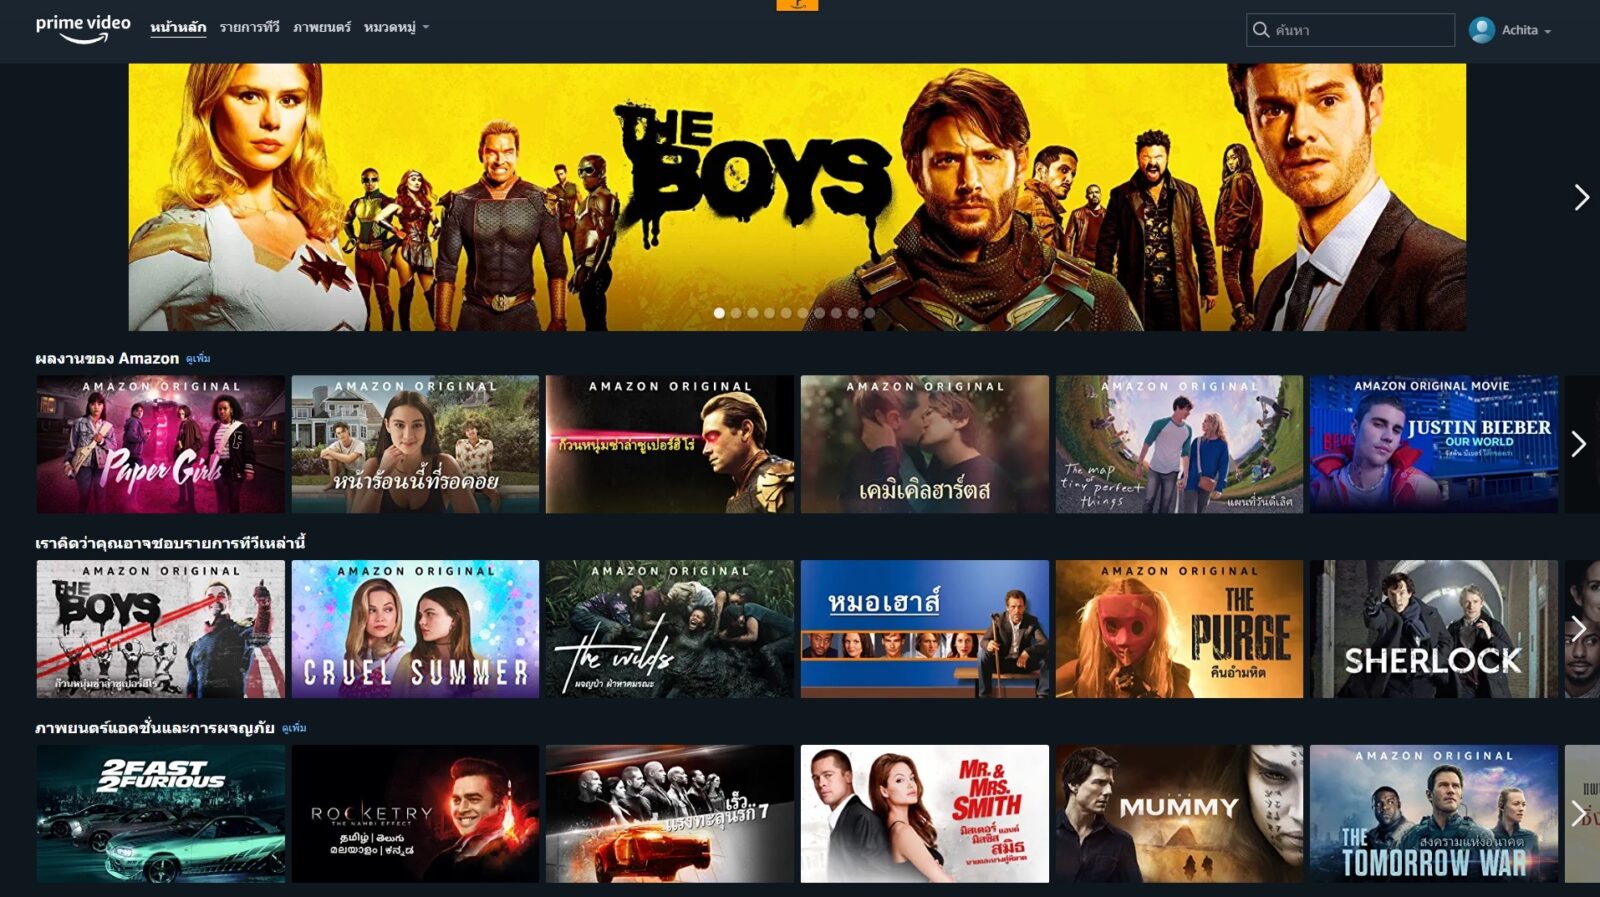 Ads are coming to  Prime Video this month - unless you pay